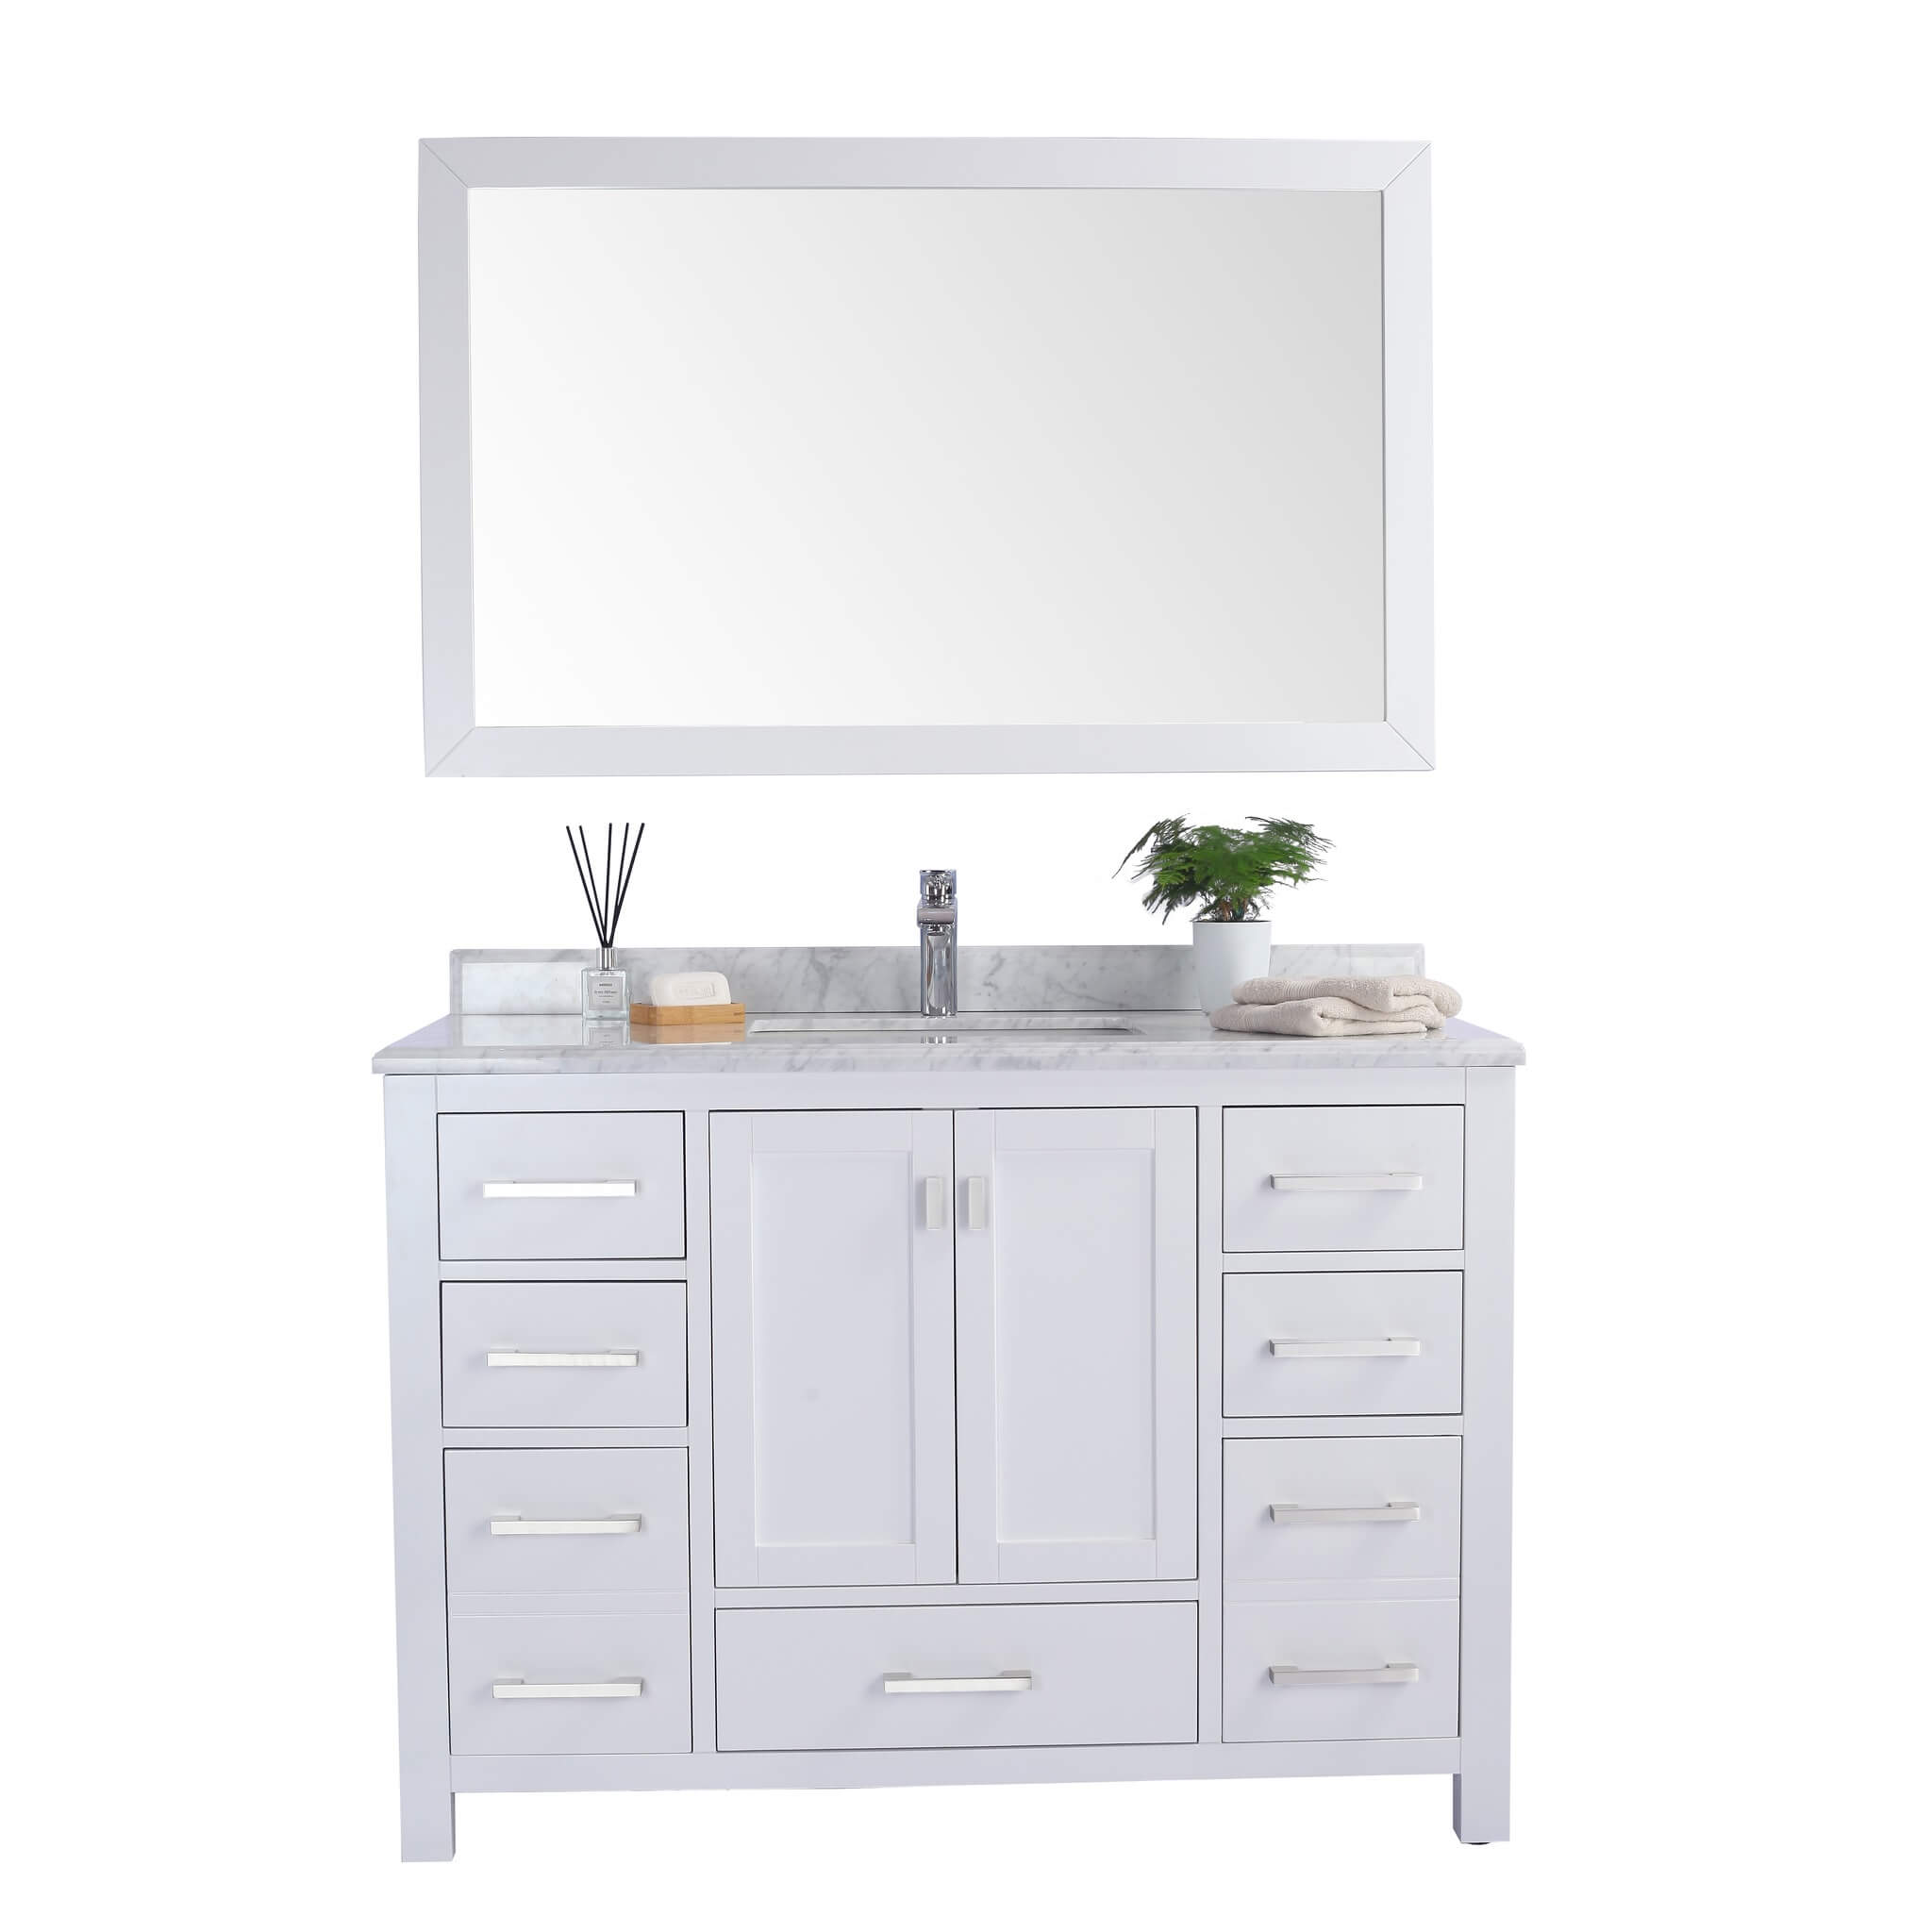 LAVIVA Wilson 313ANG-48W-WC 48" Single Bathroom Vanity in White with White Carrara Marble, White Rectangle Sink, Front View